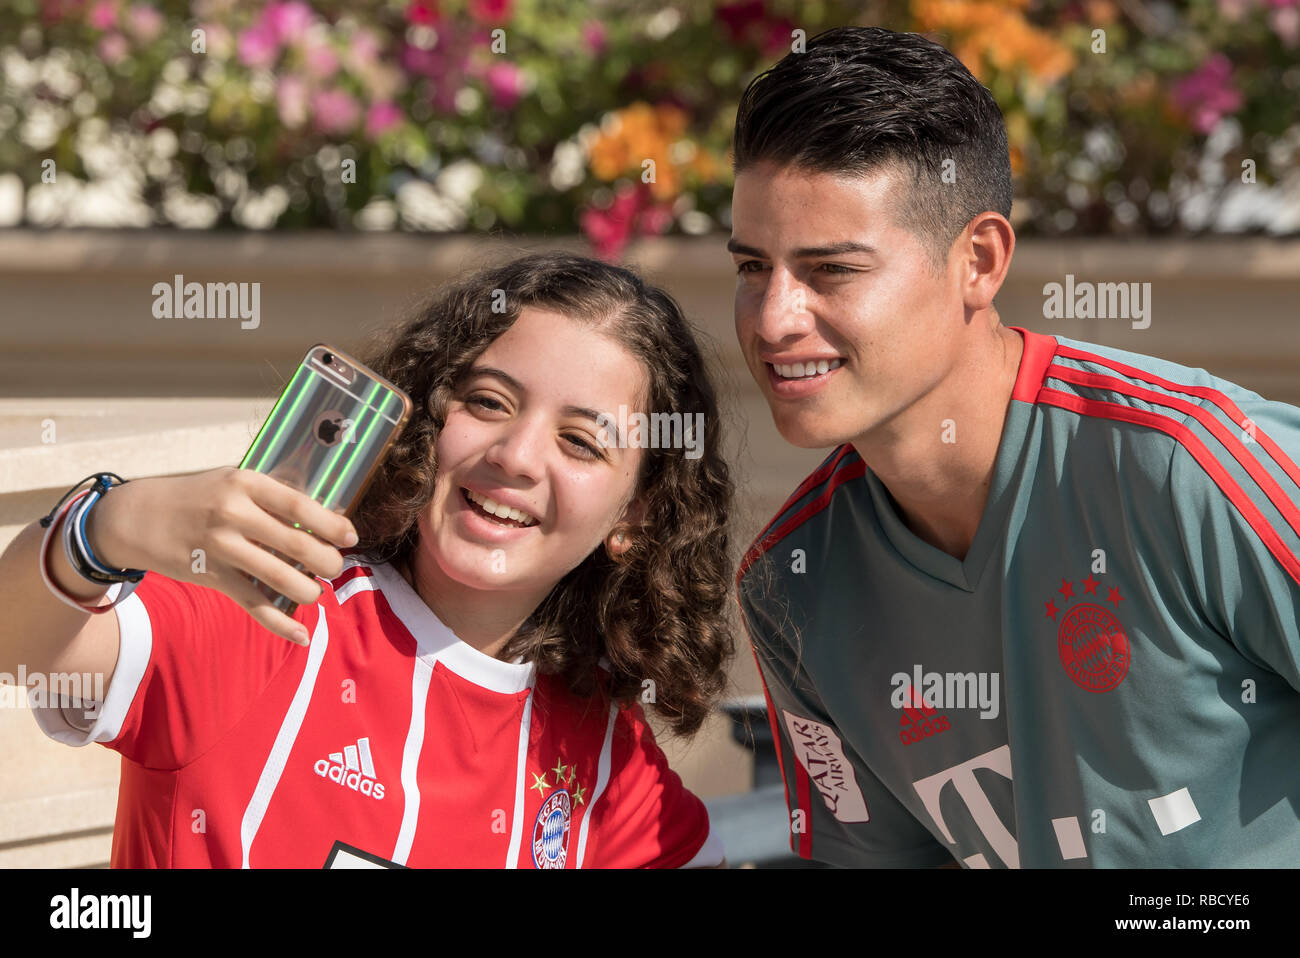 Doha, Qatar. 09th Jan, 2019. Soccer: Bundesliga, training camp FC Bayern Munich: James Rodriguez has himself photographed with a young female fan before the start of the morning practice session. FC Bayern will stay in the desert city until 10.01.2019 for their training camp. Credit: Peter Kneffel/dpa - IMPORTANT NOTE: In accordance with the requirements of the DFL Deutsche Fußball Liga or the DFB Deutscher Fußball-Bund, it is prohibited to use or have used photographs taken in the stadium and/or the match in the form of sequence images and/or video-like photo sequences./dpa/Alamy Live News Stock Photo